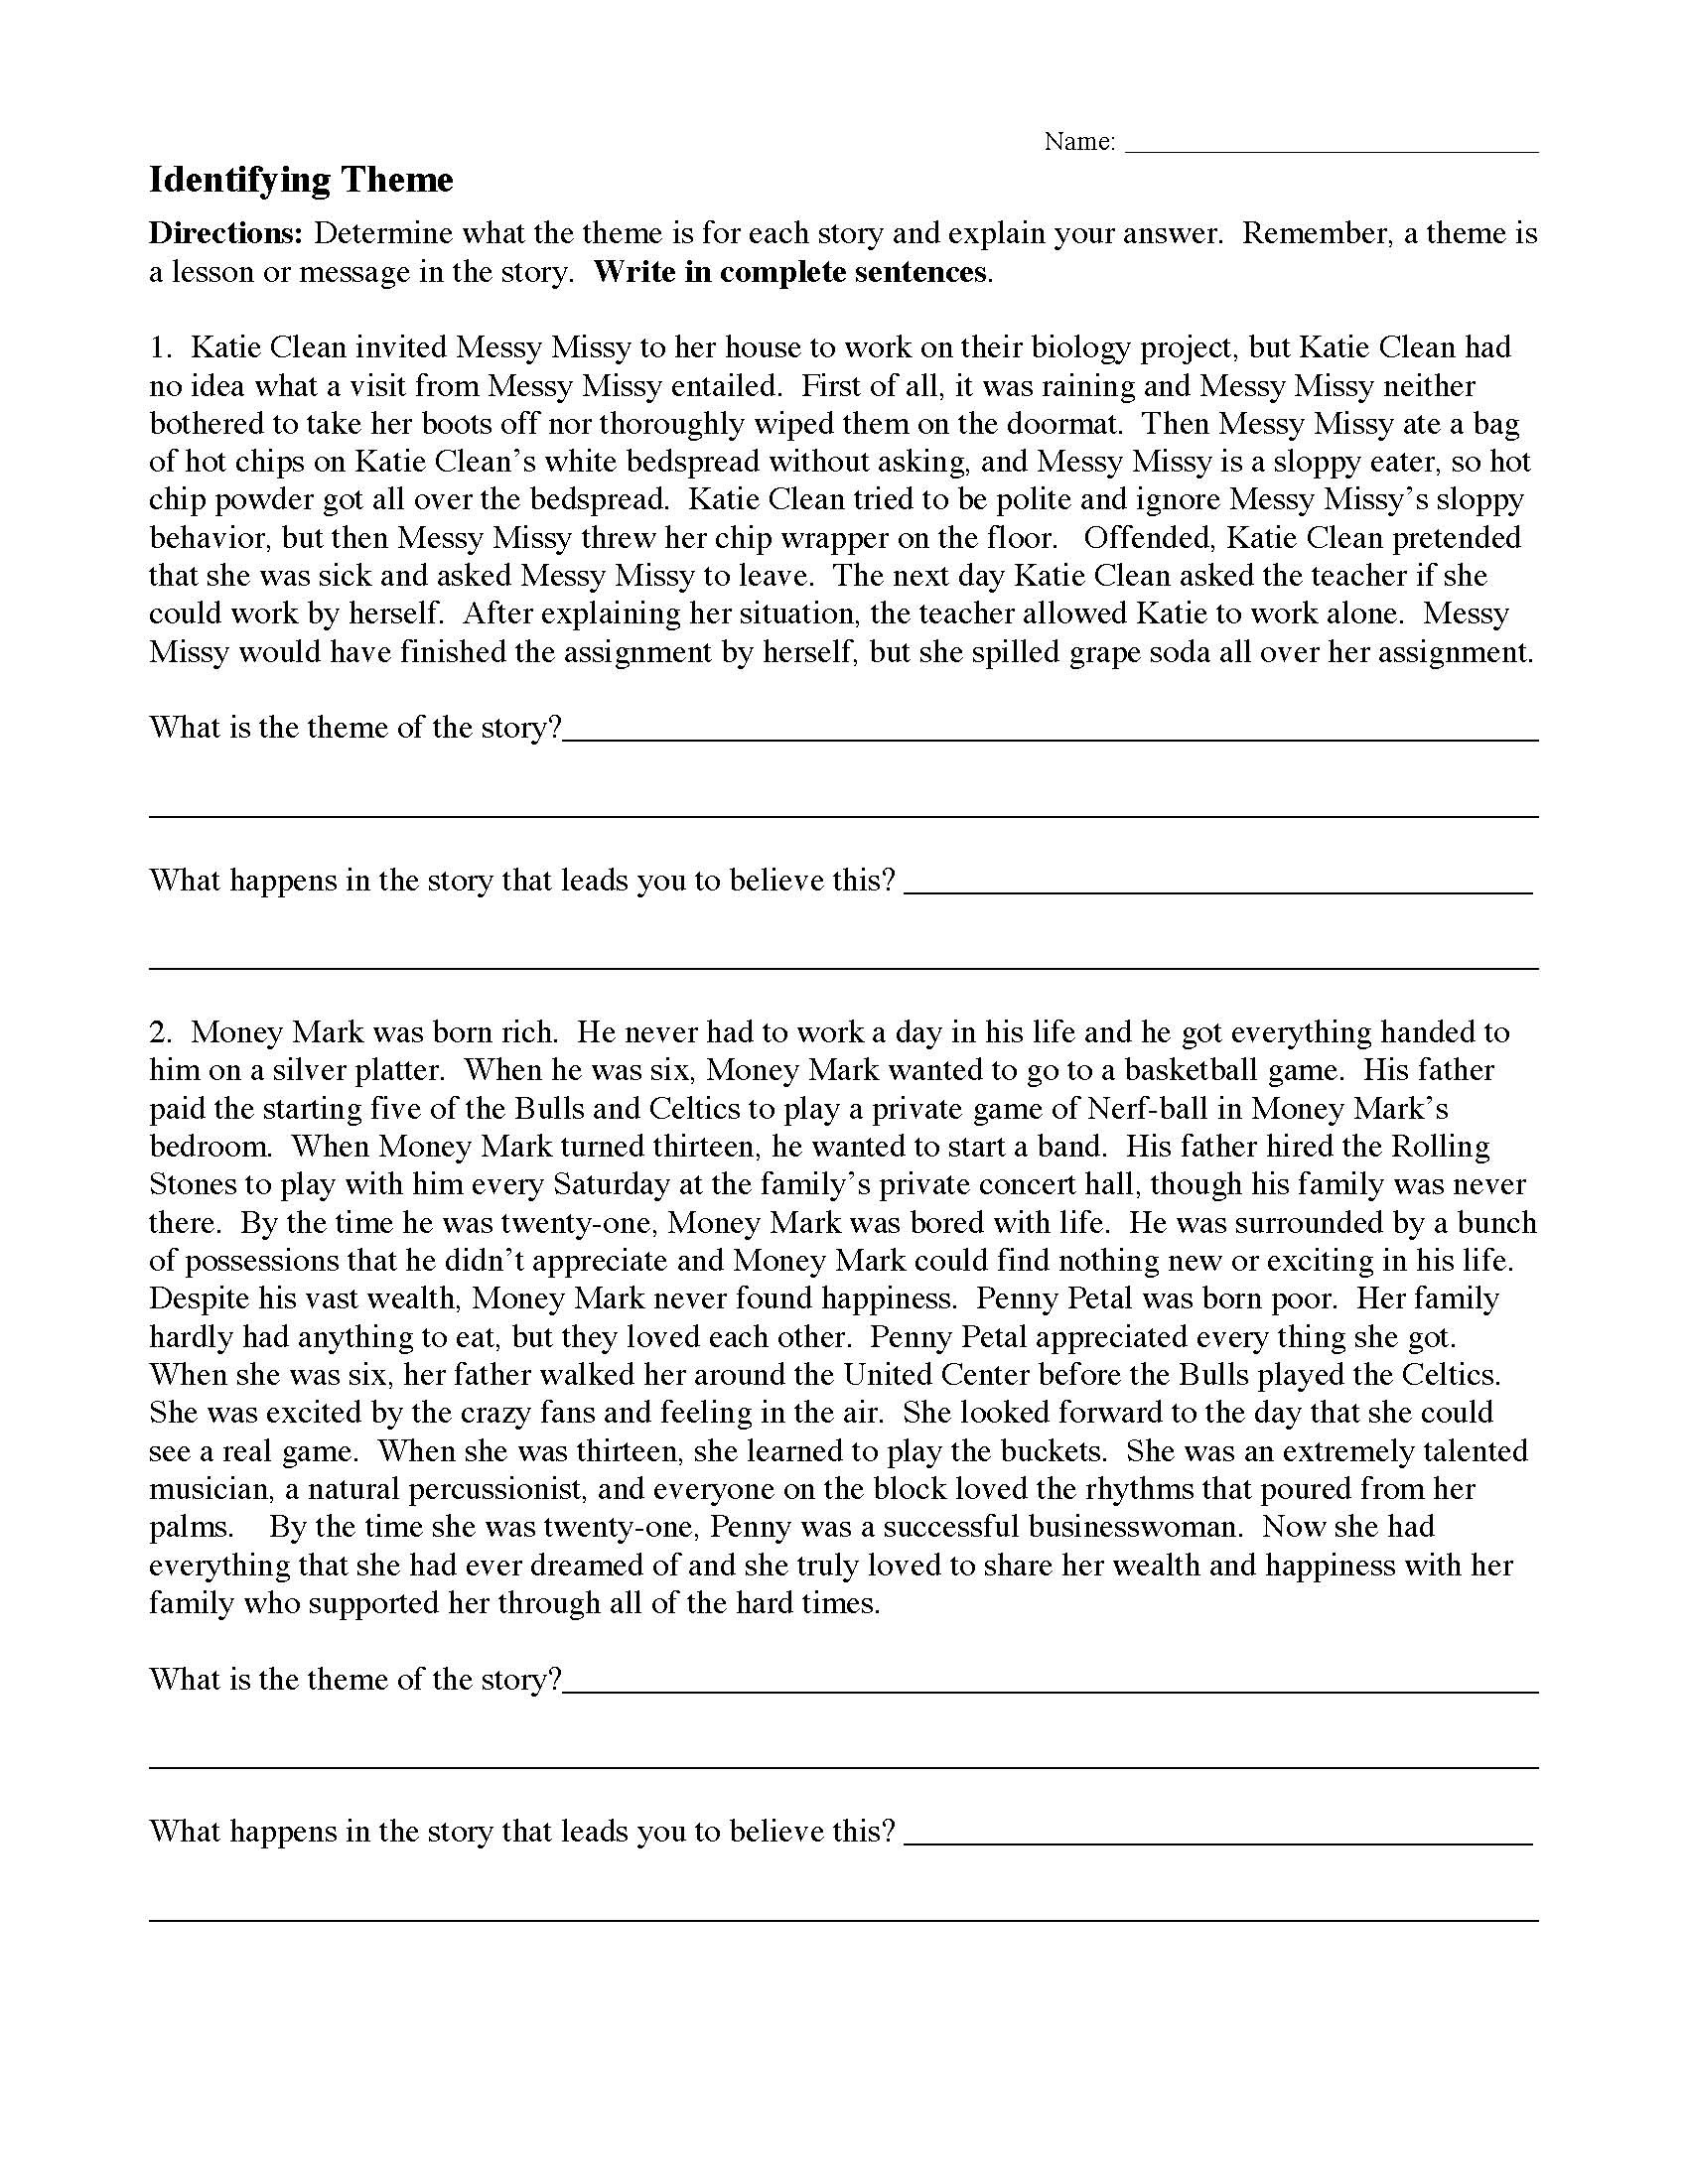 Finding The Theme Of A Story Worksheets db excel com